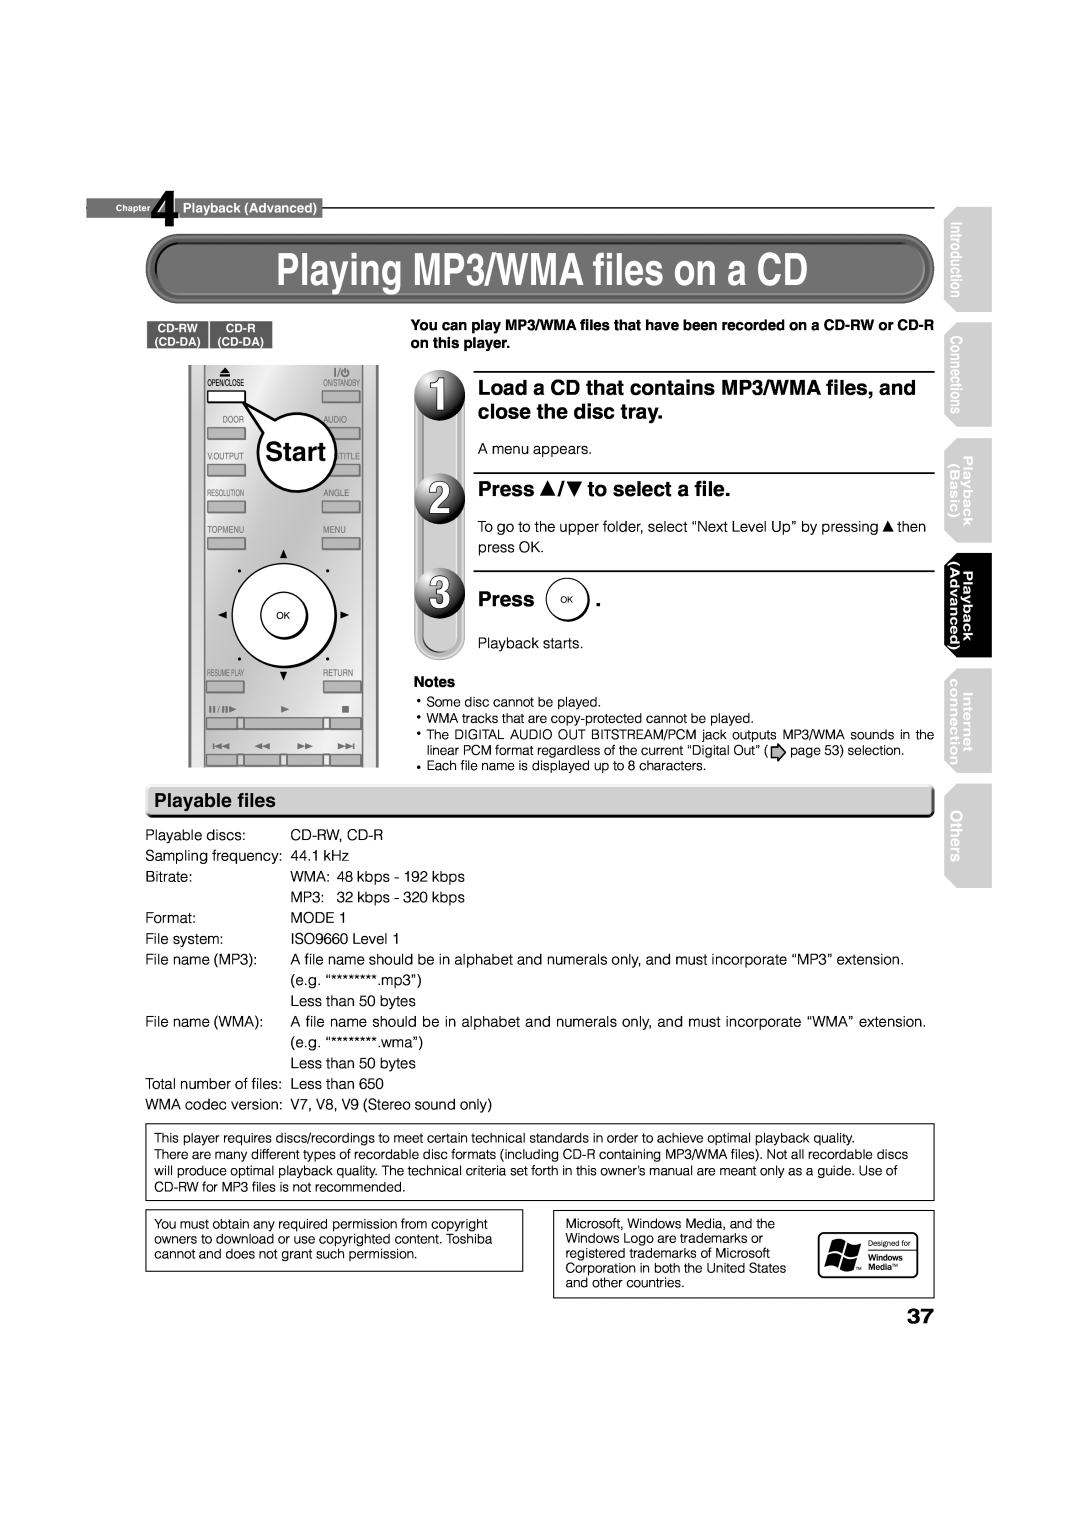 Toshiba hd-xa1kn Playing MP3/WMA ﬁles on a CD, Load a CD that contains MP3/WMA ﬁles, and, close the disc tray, Advanced 